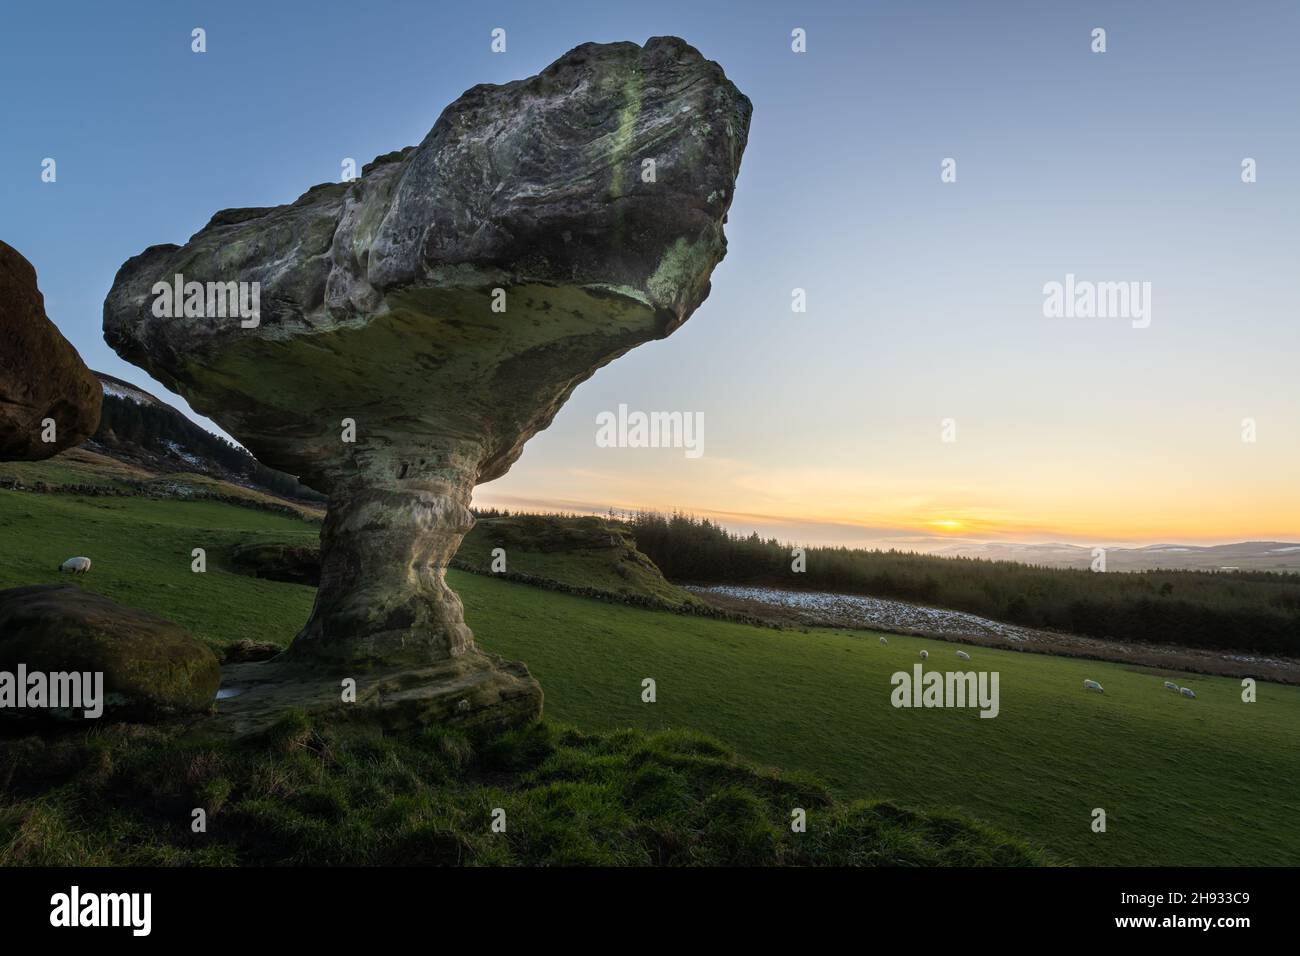 The Bunnet Stane, or Bonnet Stone, at the foot of the Lomond hills in Kinross-shire, Scotland, UK. Stock Photo